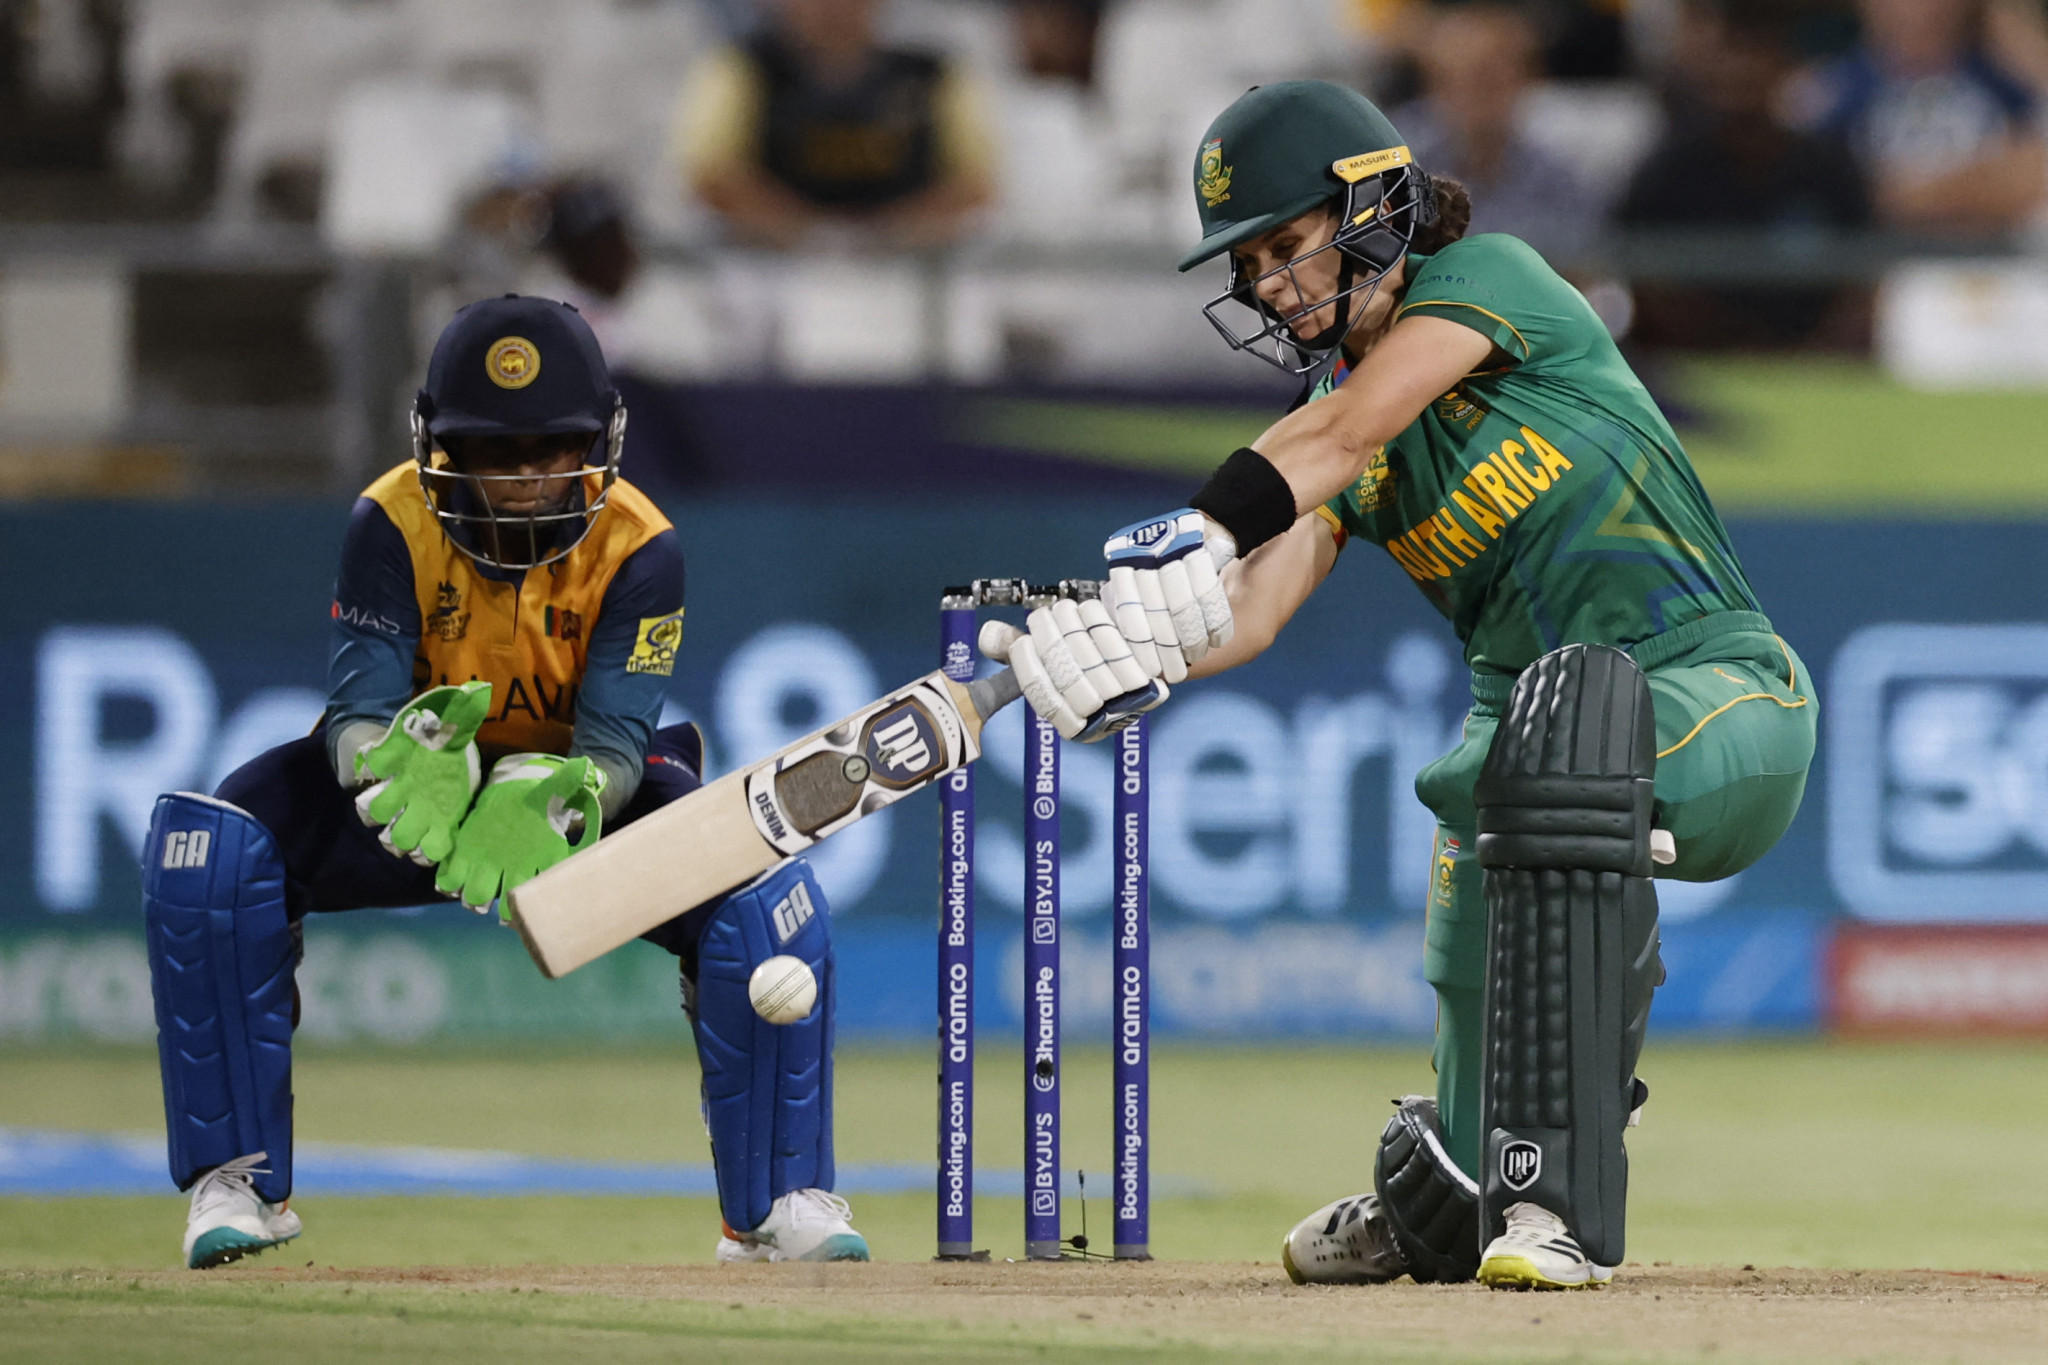 Hosts South Africa suffered a three-run defeat at the hands of Sri Lanka in the tournament opener at Cape Town ©Getty Images